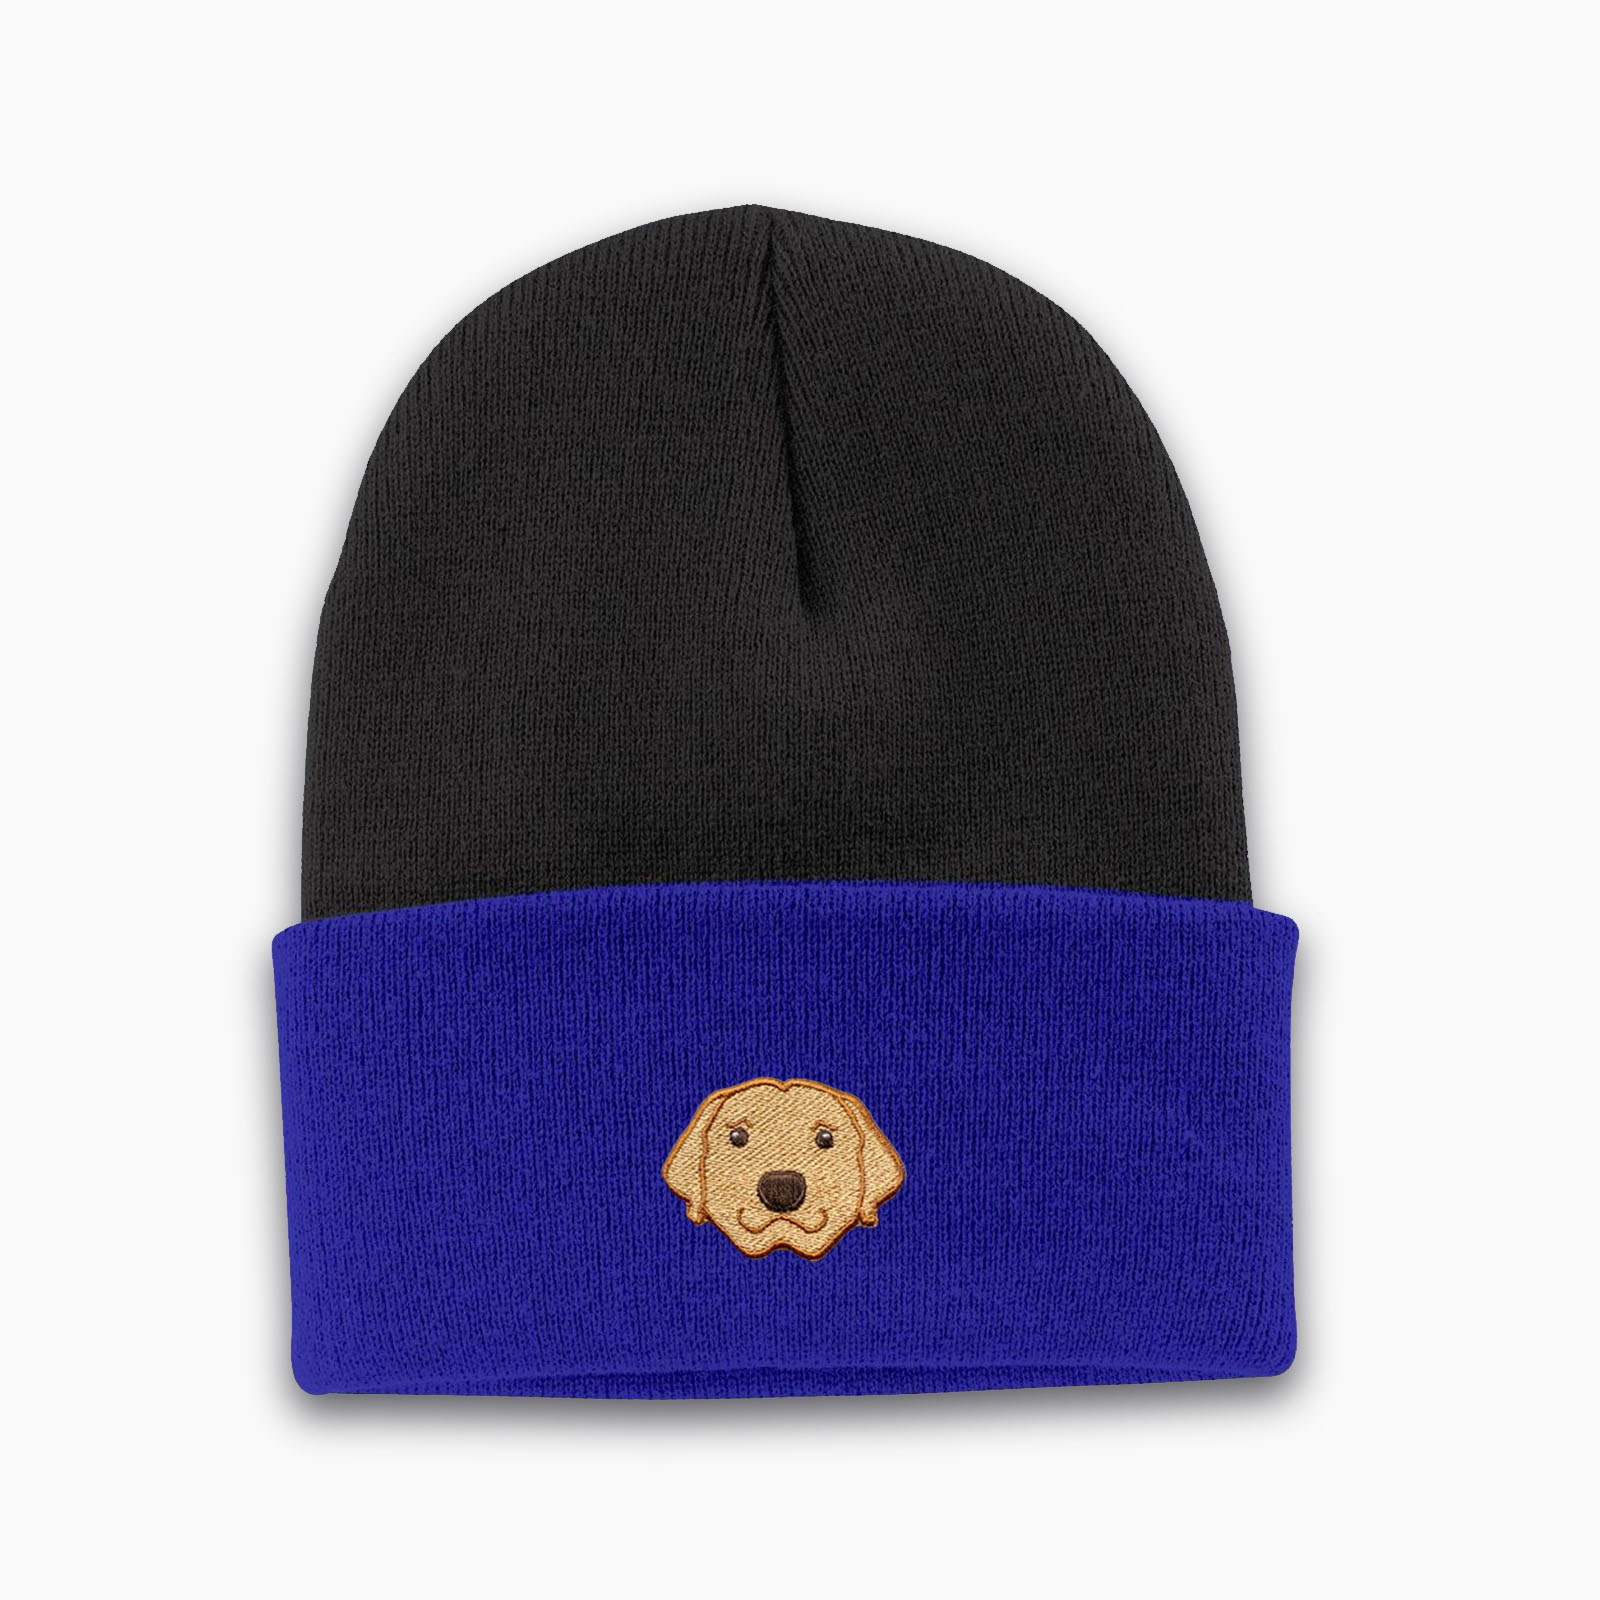 Royal & Black Custom beanie personalized and embroidered on the front.